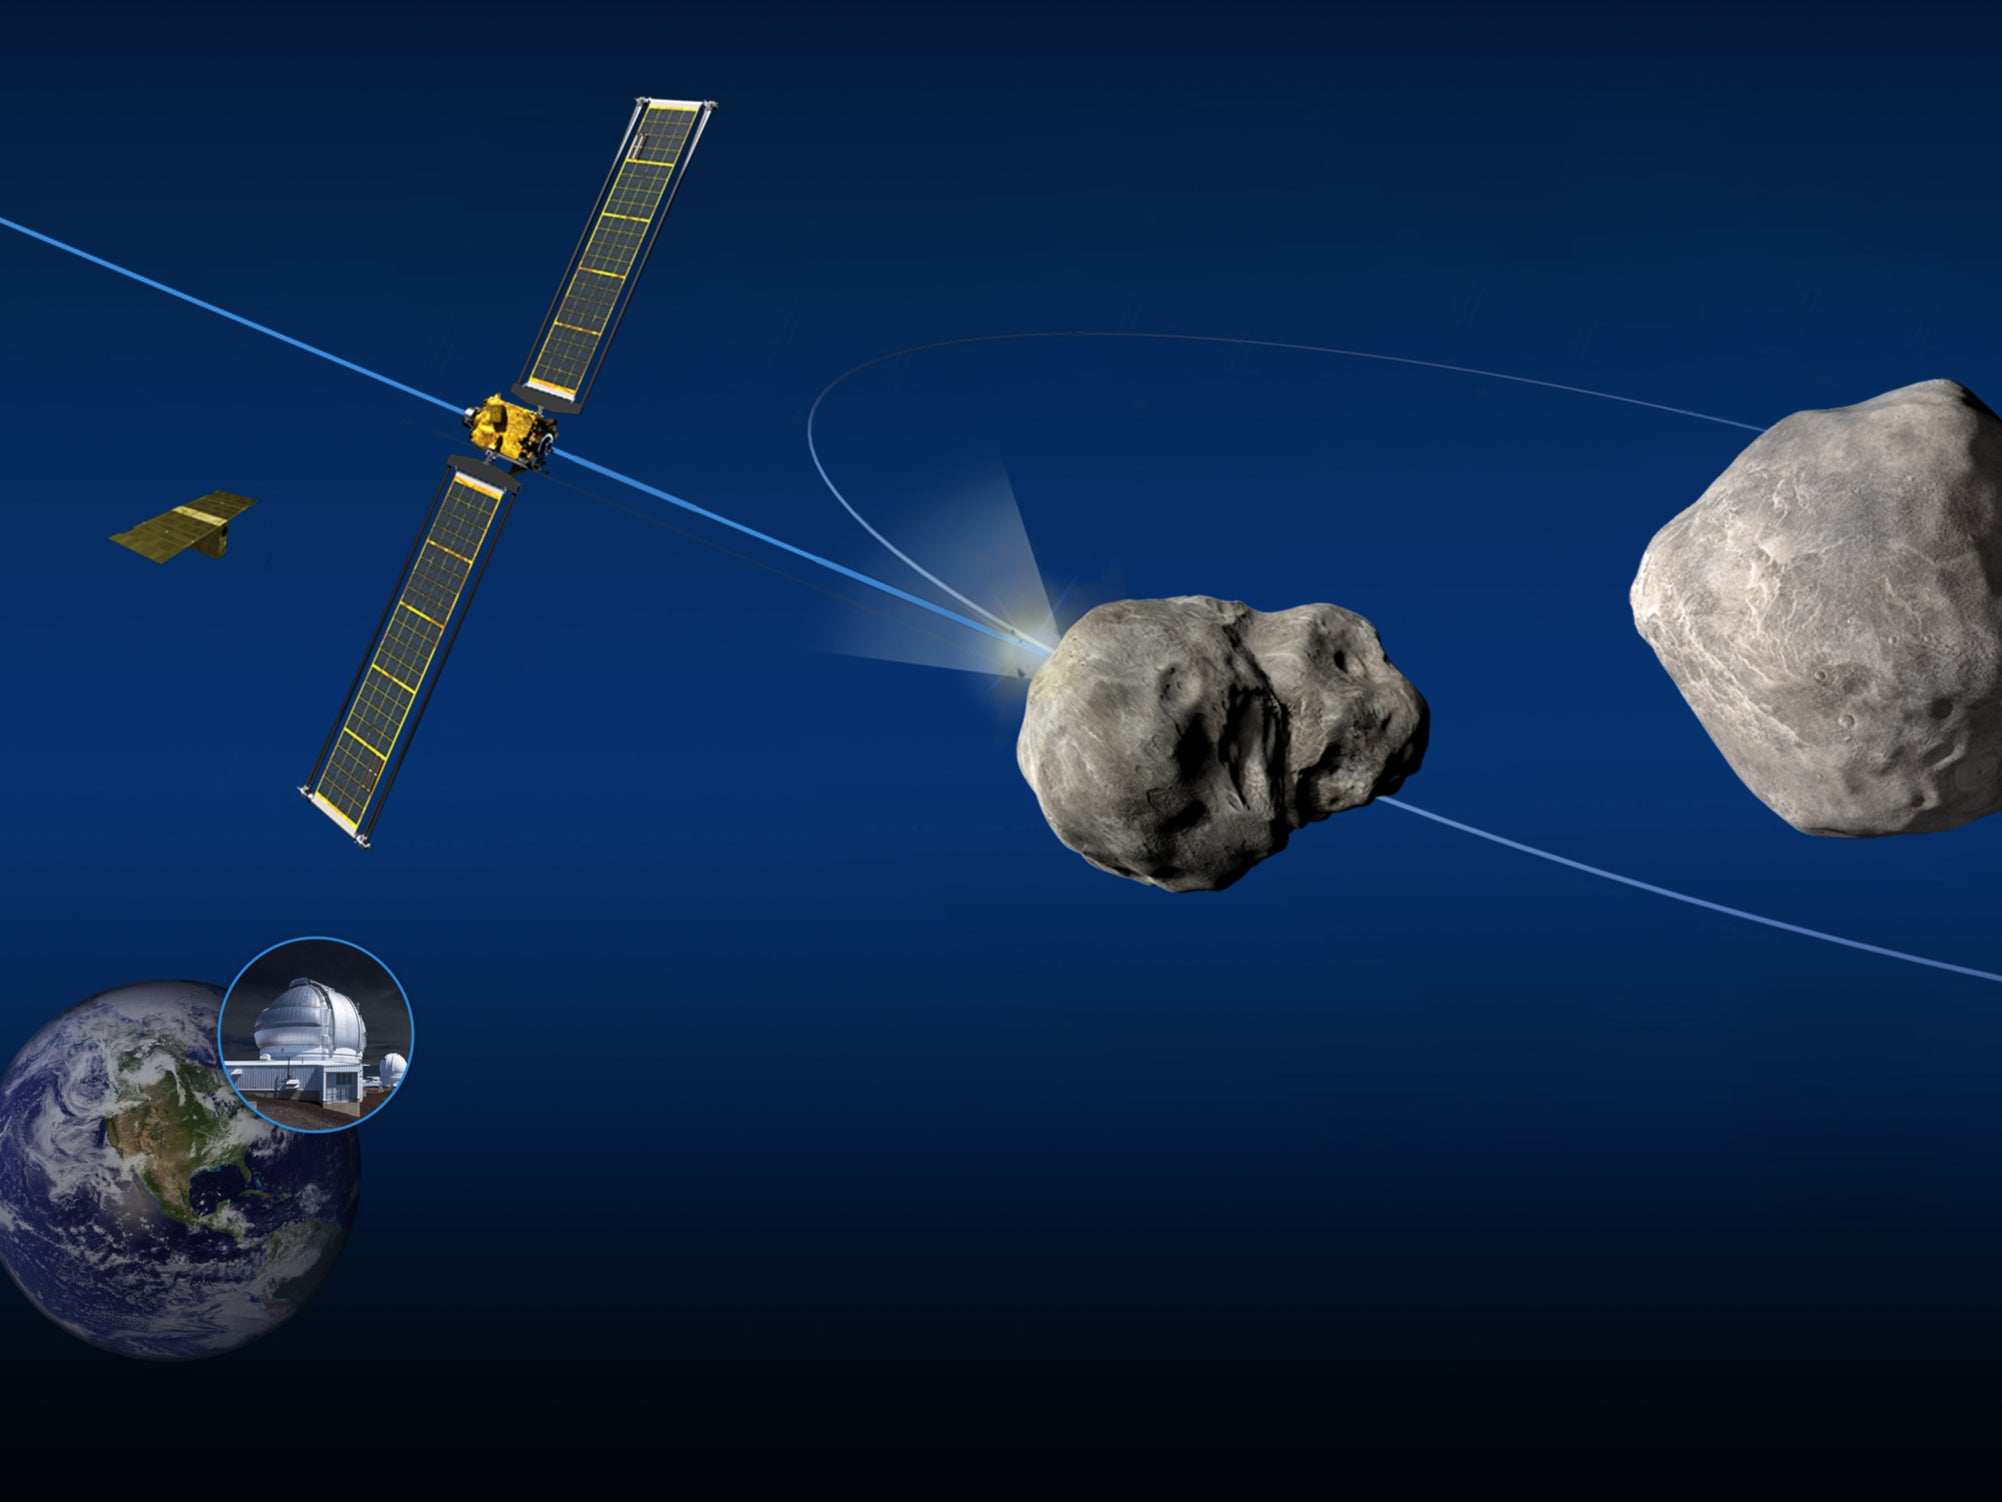 The DART spacecraft is programmed to smash into asteroid moon Dimorphos, to see if it changes its orbital motion